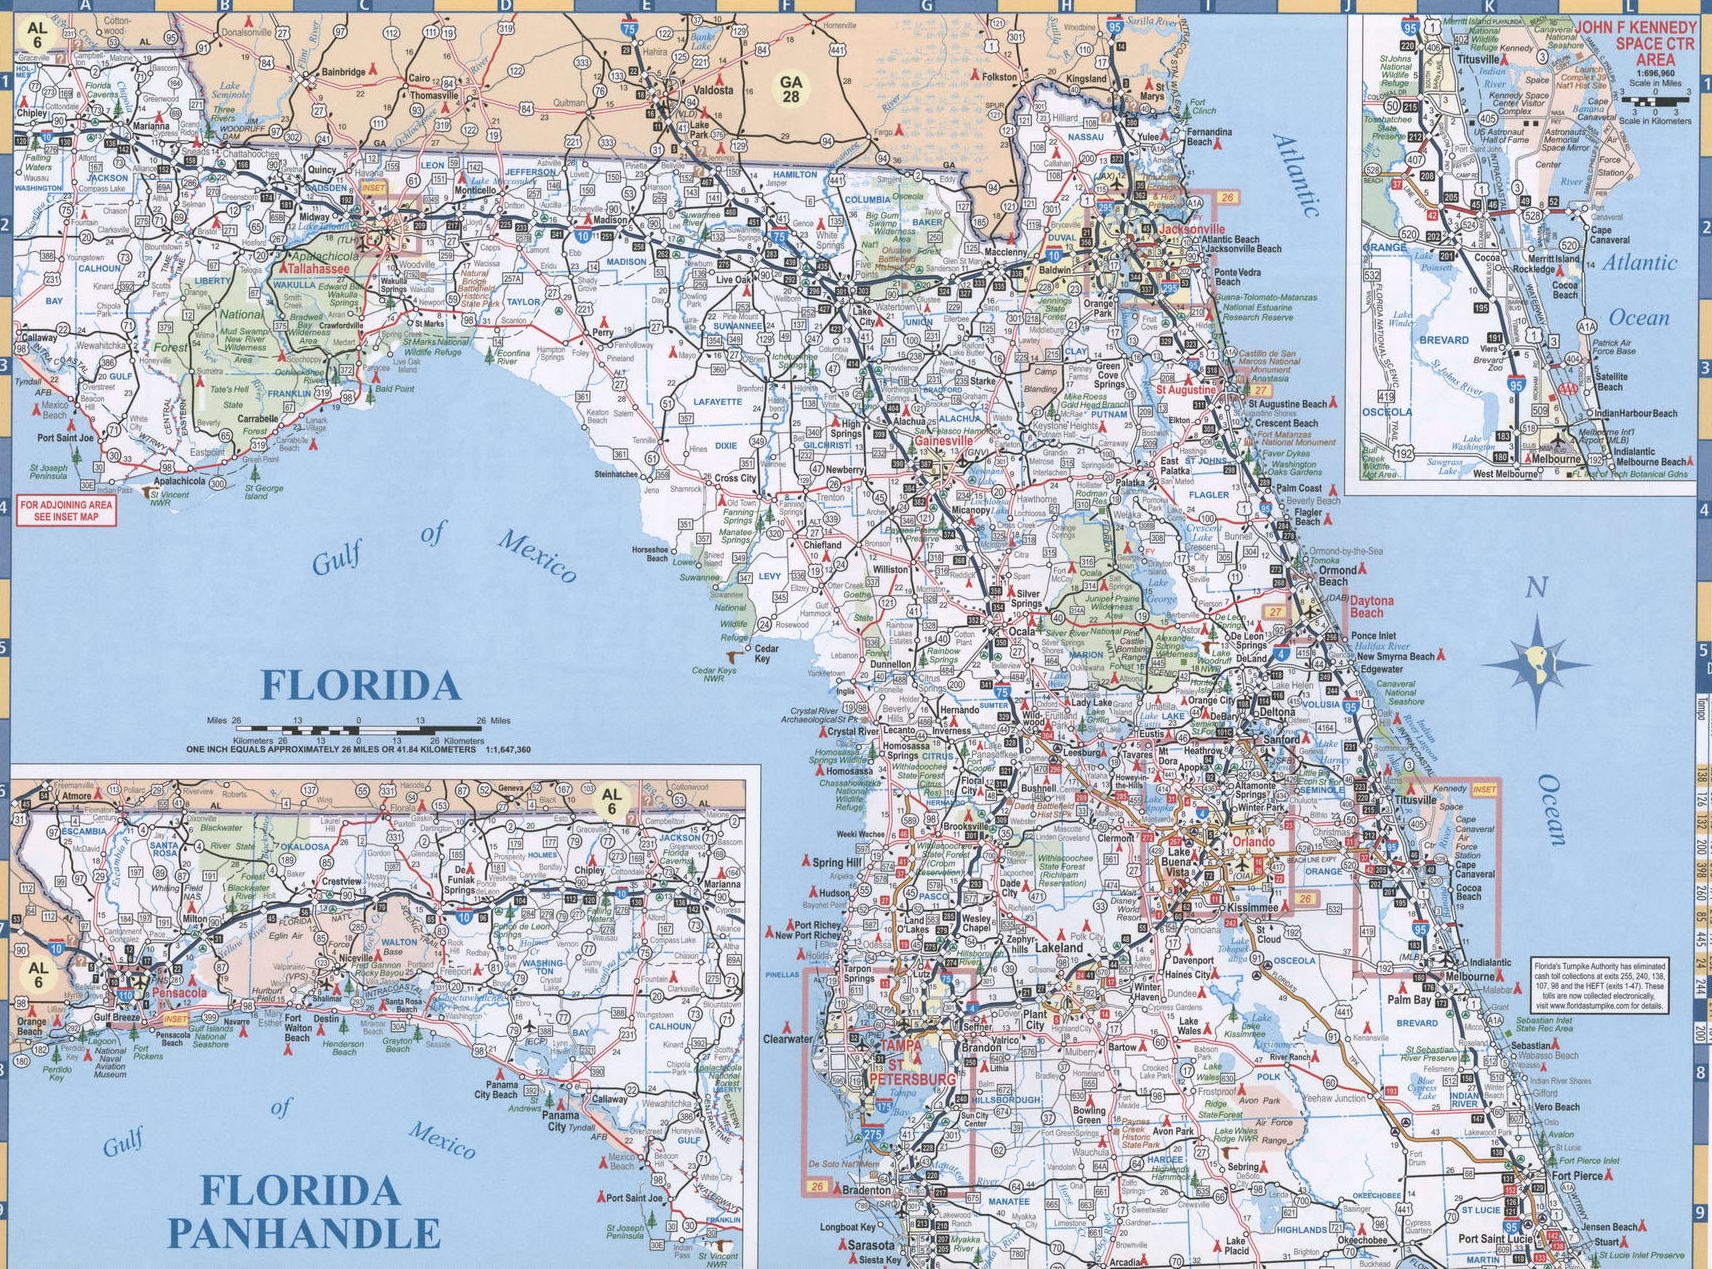 North Florida road map - Highways and roads USA